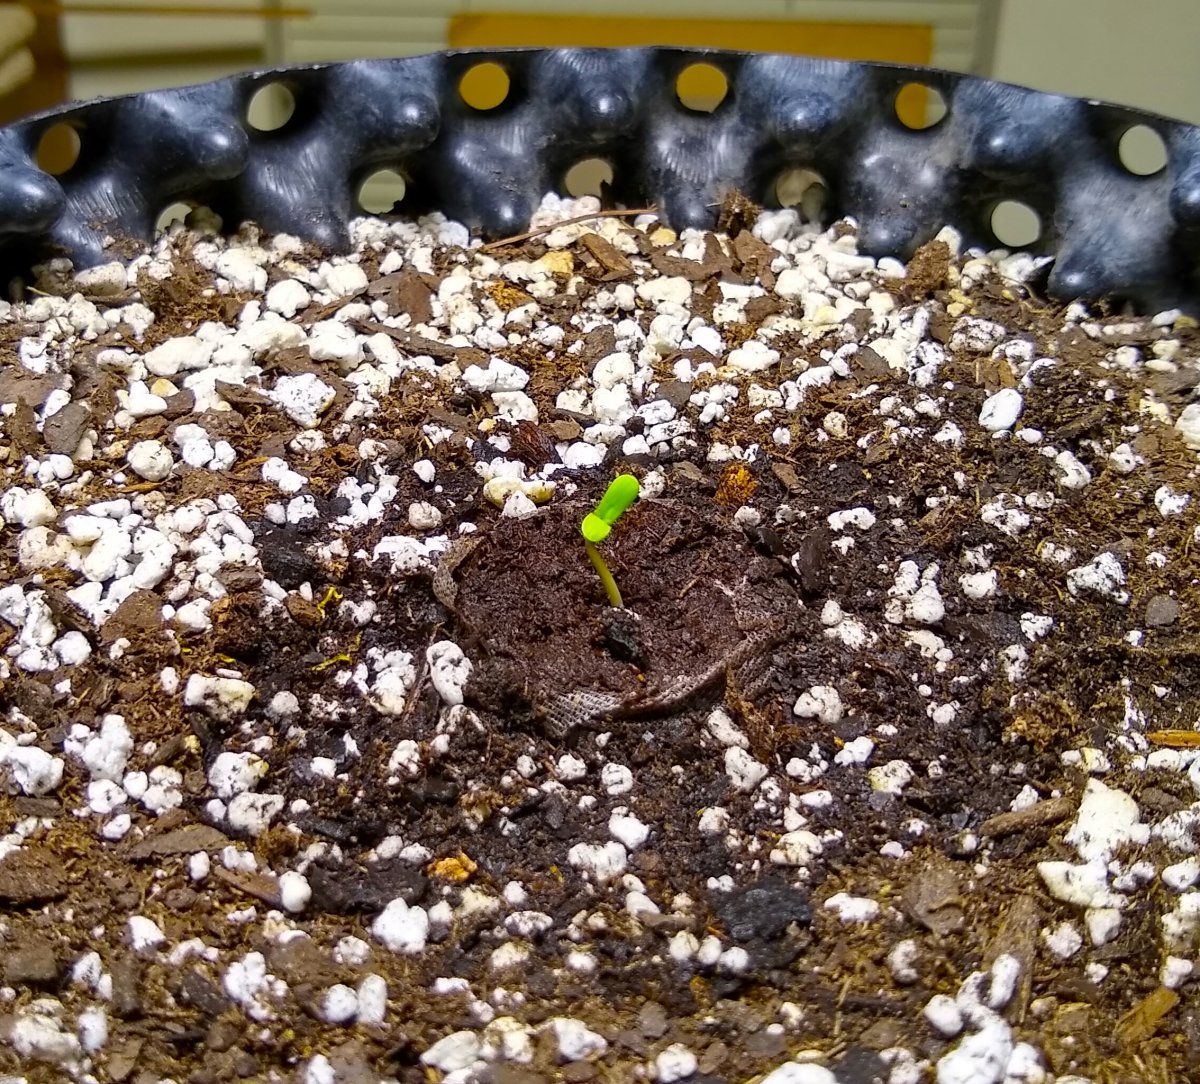 15 hours from sprout